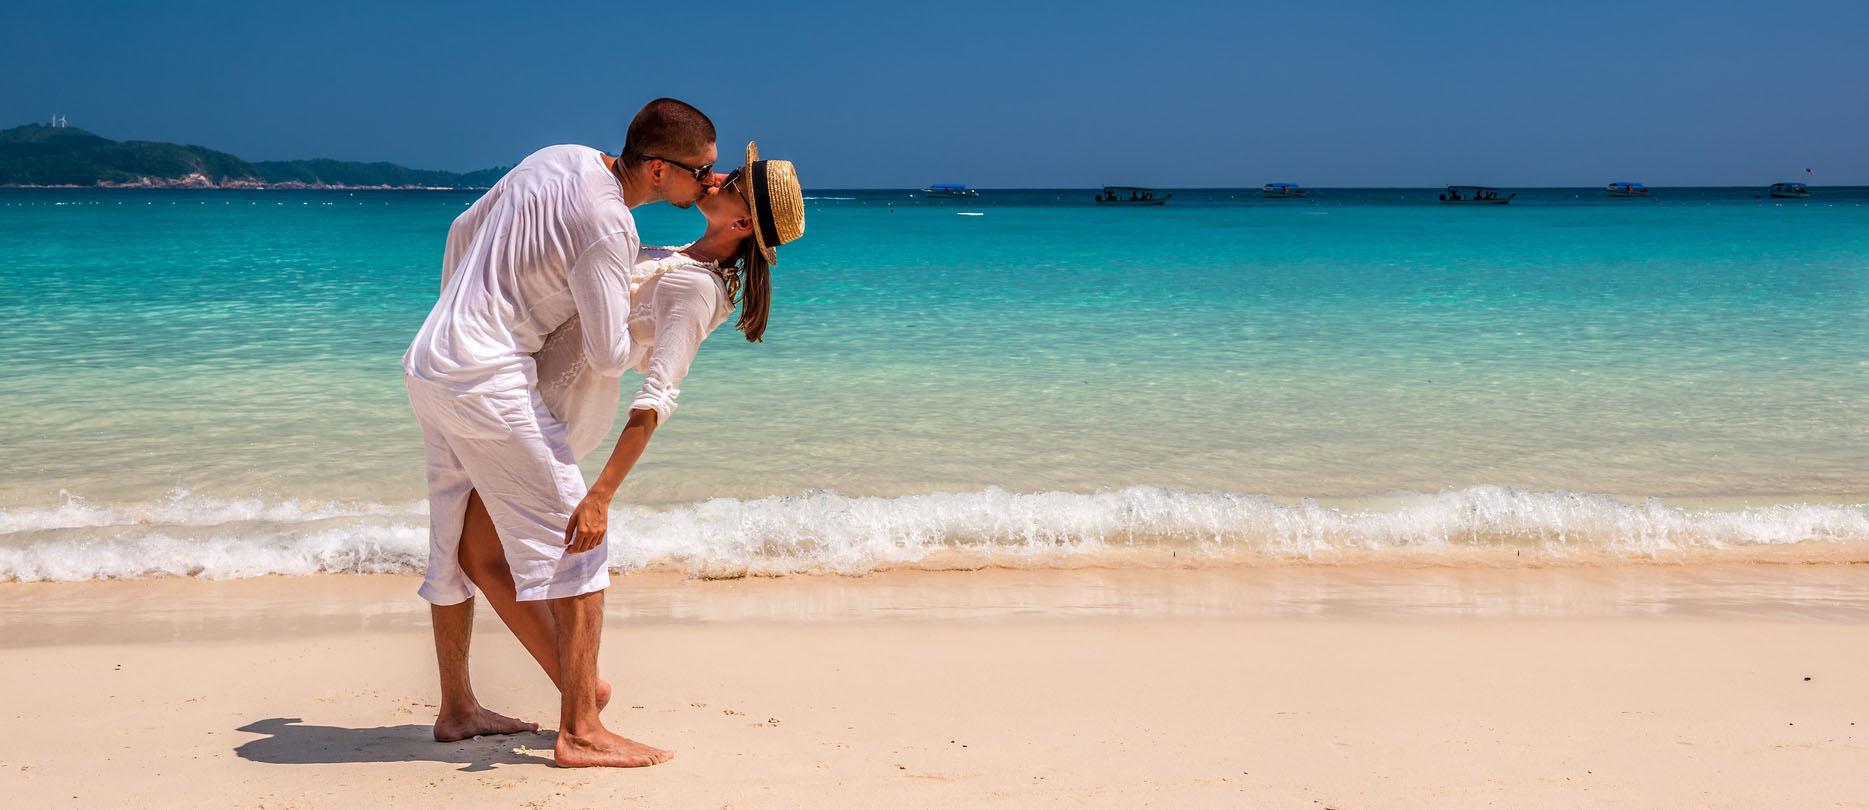 50 Ideas For Affordable Honeymoon Packages